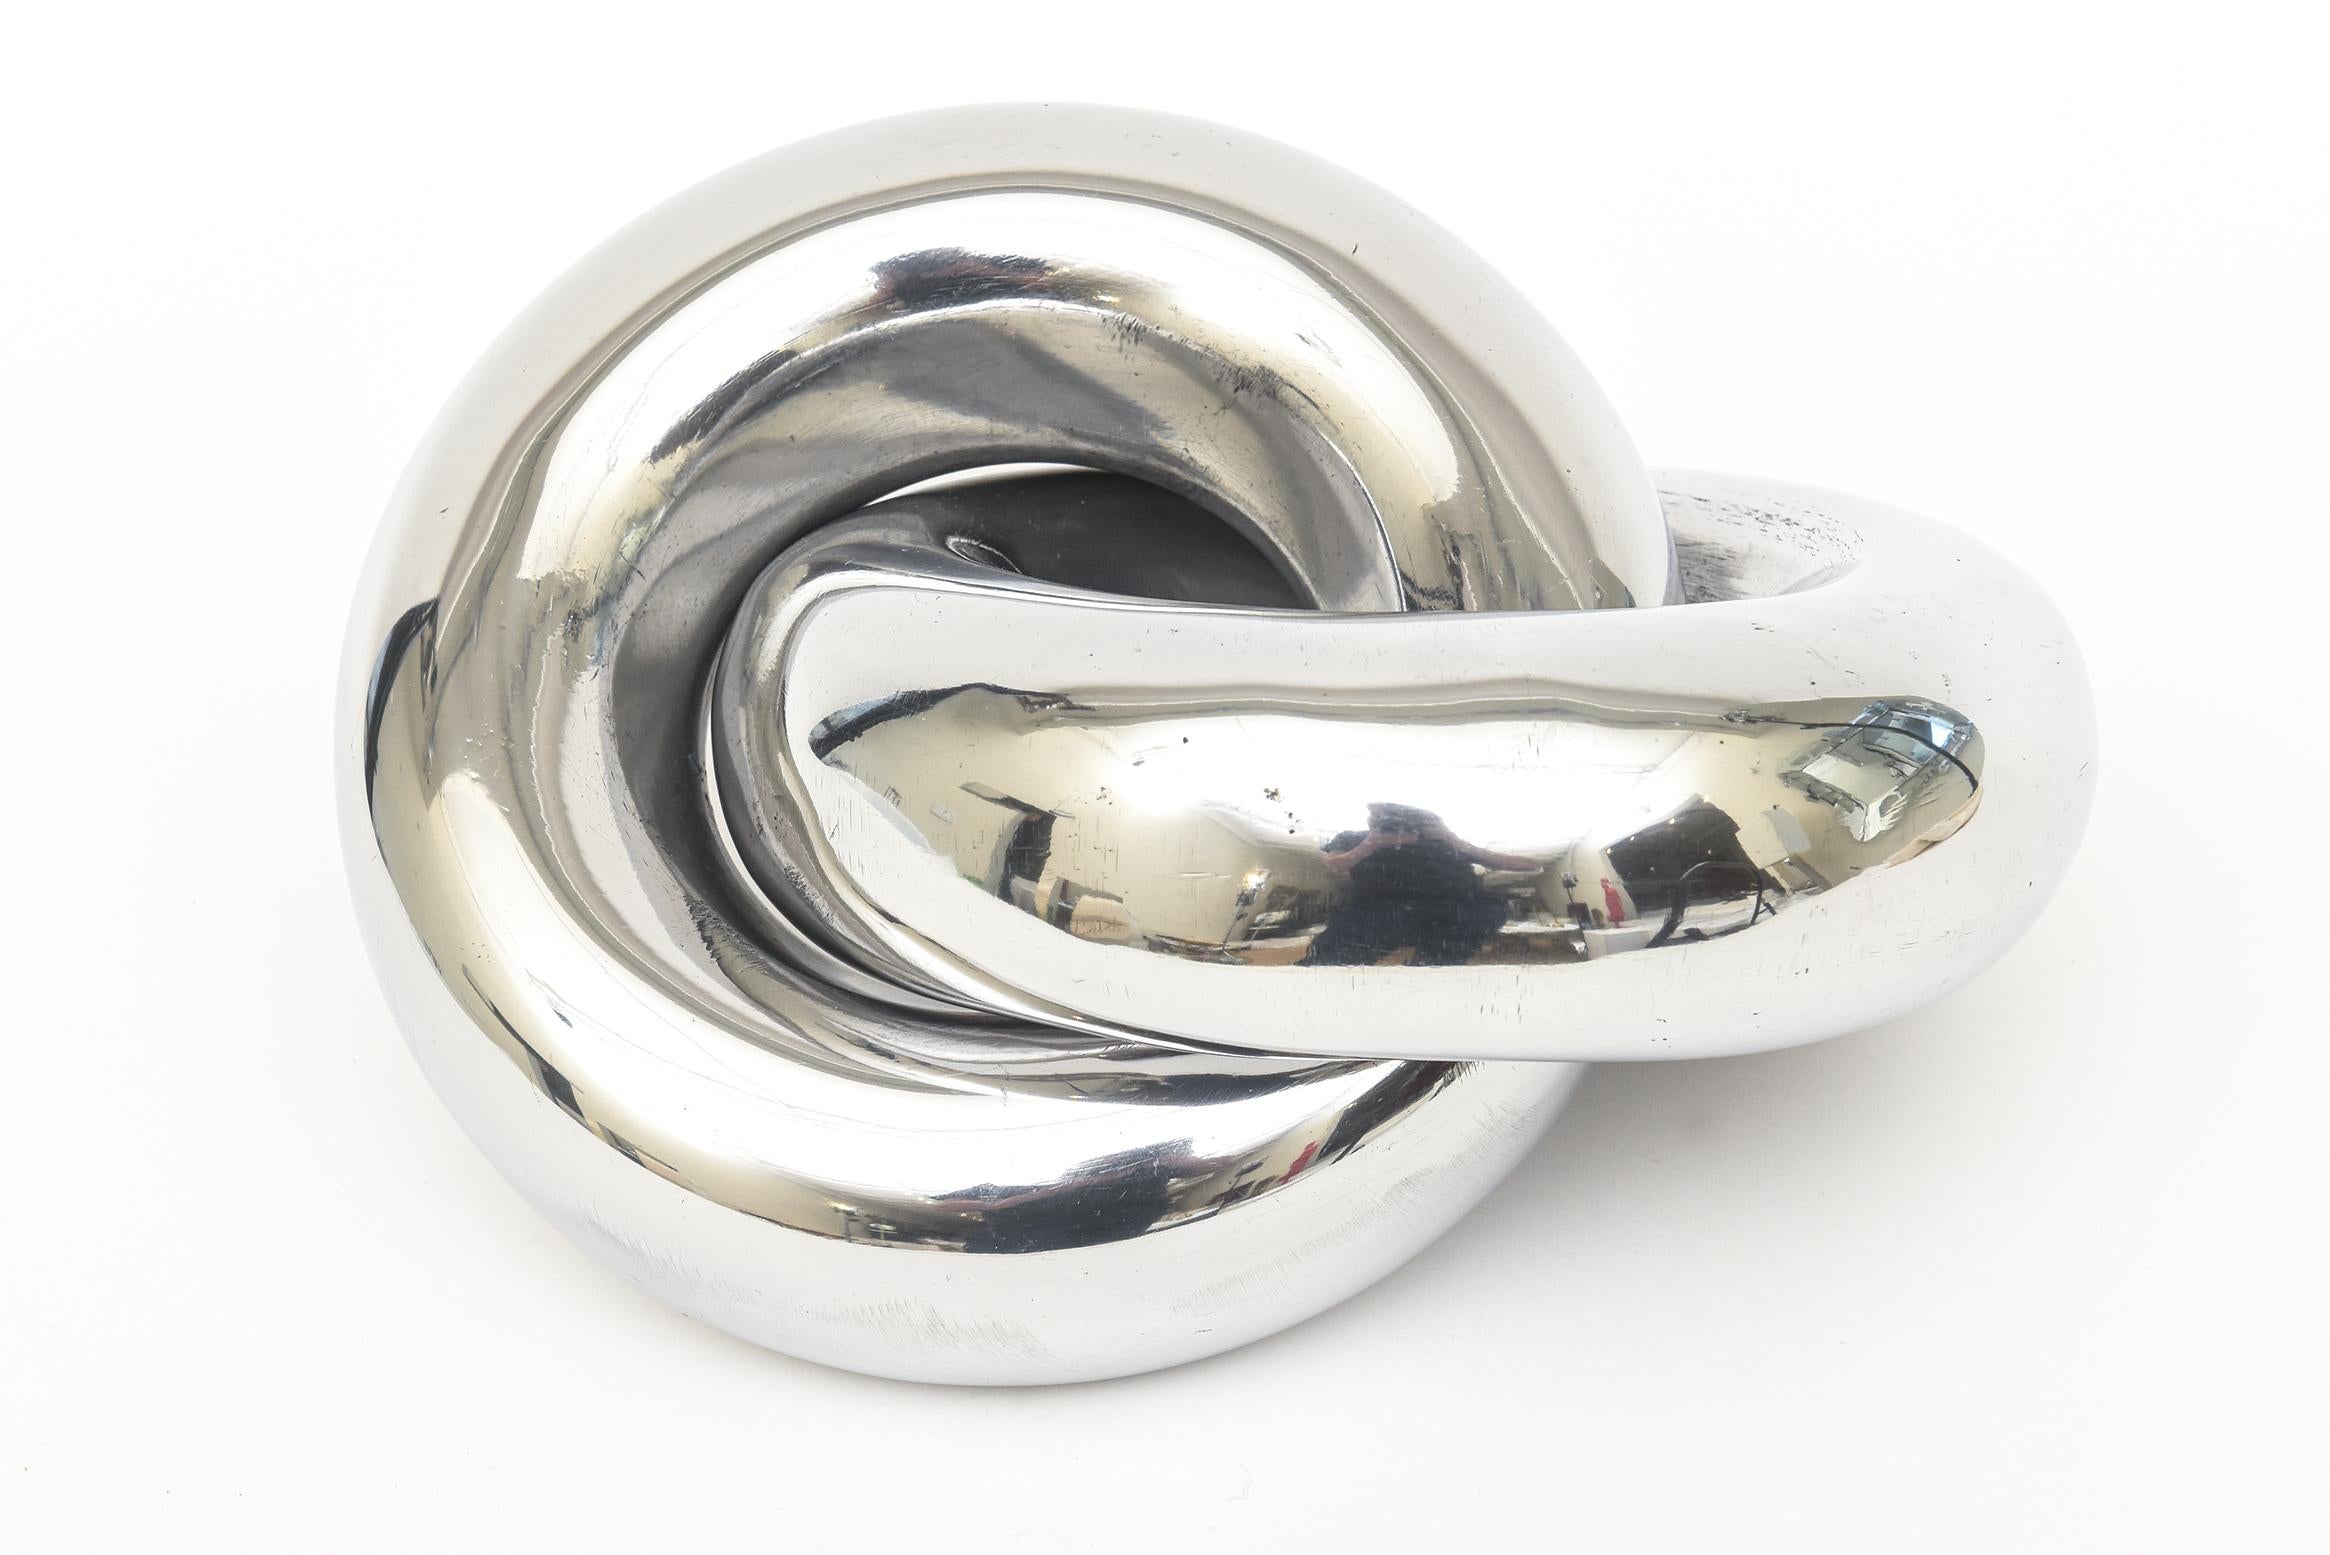 This authentic twisted intertwined polished aluminum intertwined ring sculpture is vintage from the 70's. It is NOT a reissue nor is it contemporary. It has been professionally polished carefully and makes a great statement sculpture. This one is